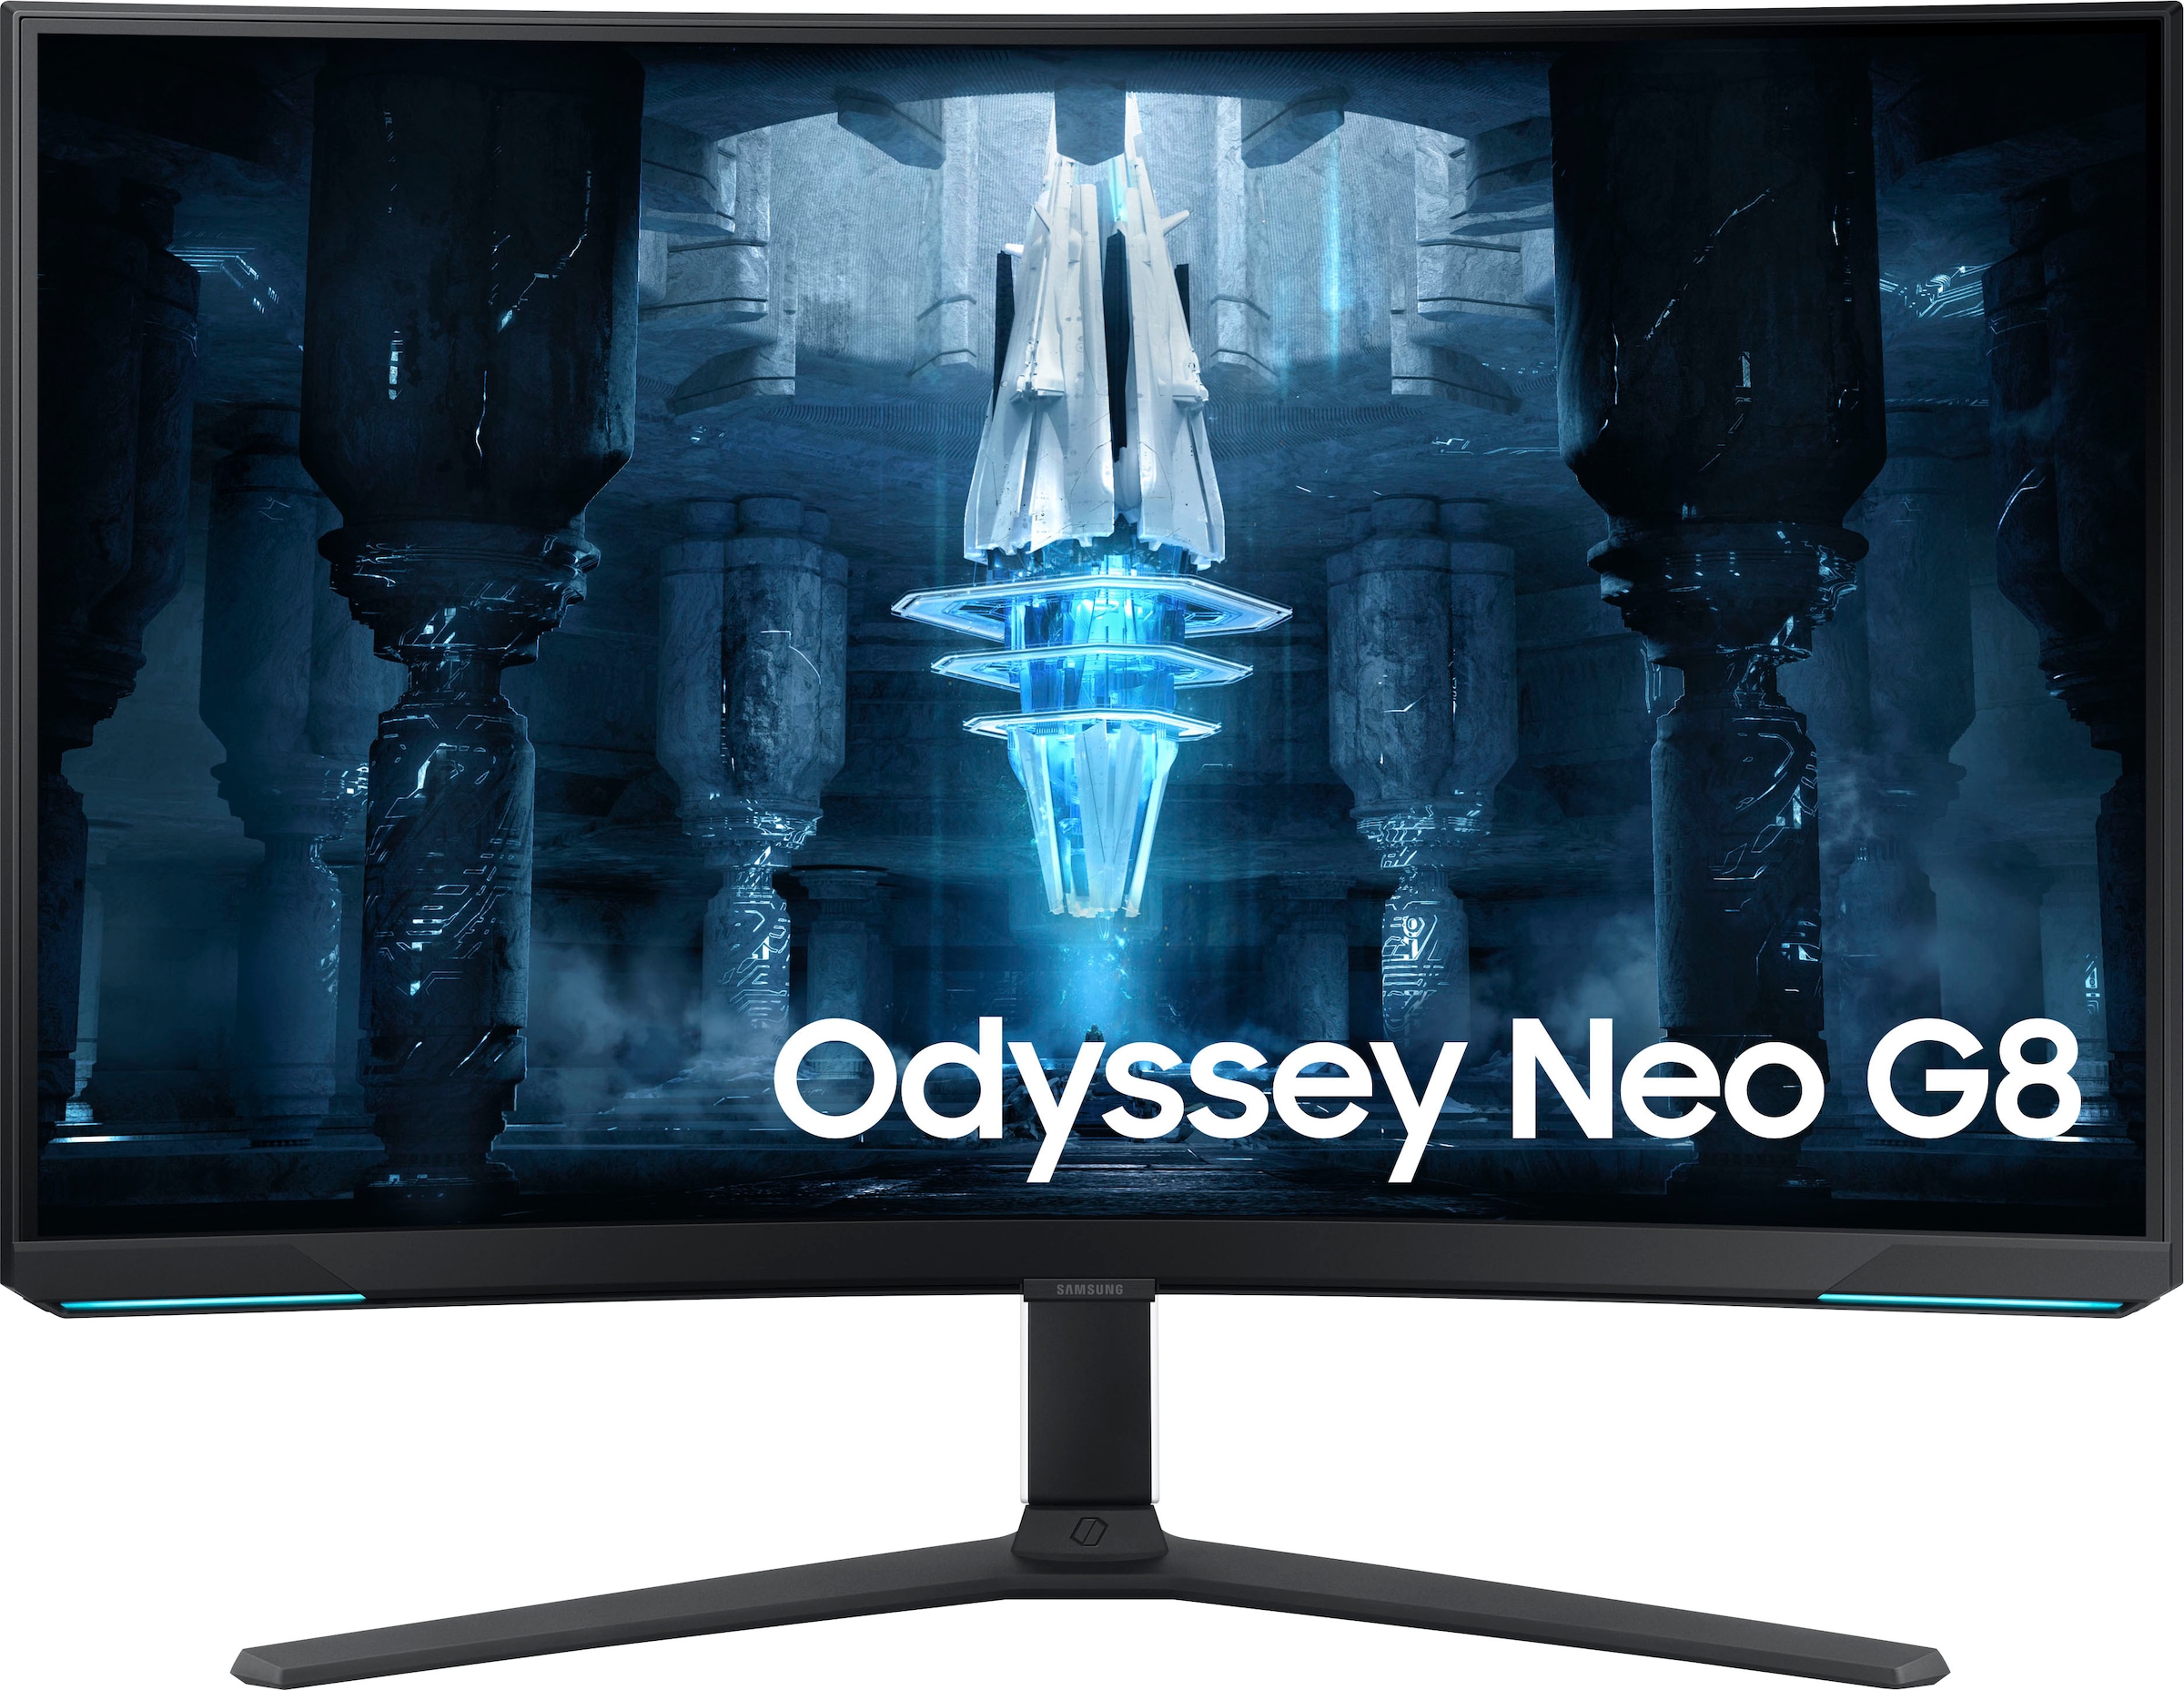 Neo cm/32 3840 ms Reaktionszeit, Curved-Gaming-LED-Monitor Hz, bei Ultra Samsung 81 HD, 1ms x OTTO G8 165 »Odyssey 1 Zoll, 2160 px, (G/G) 4K S32BG850NP«,